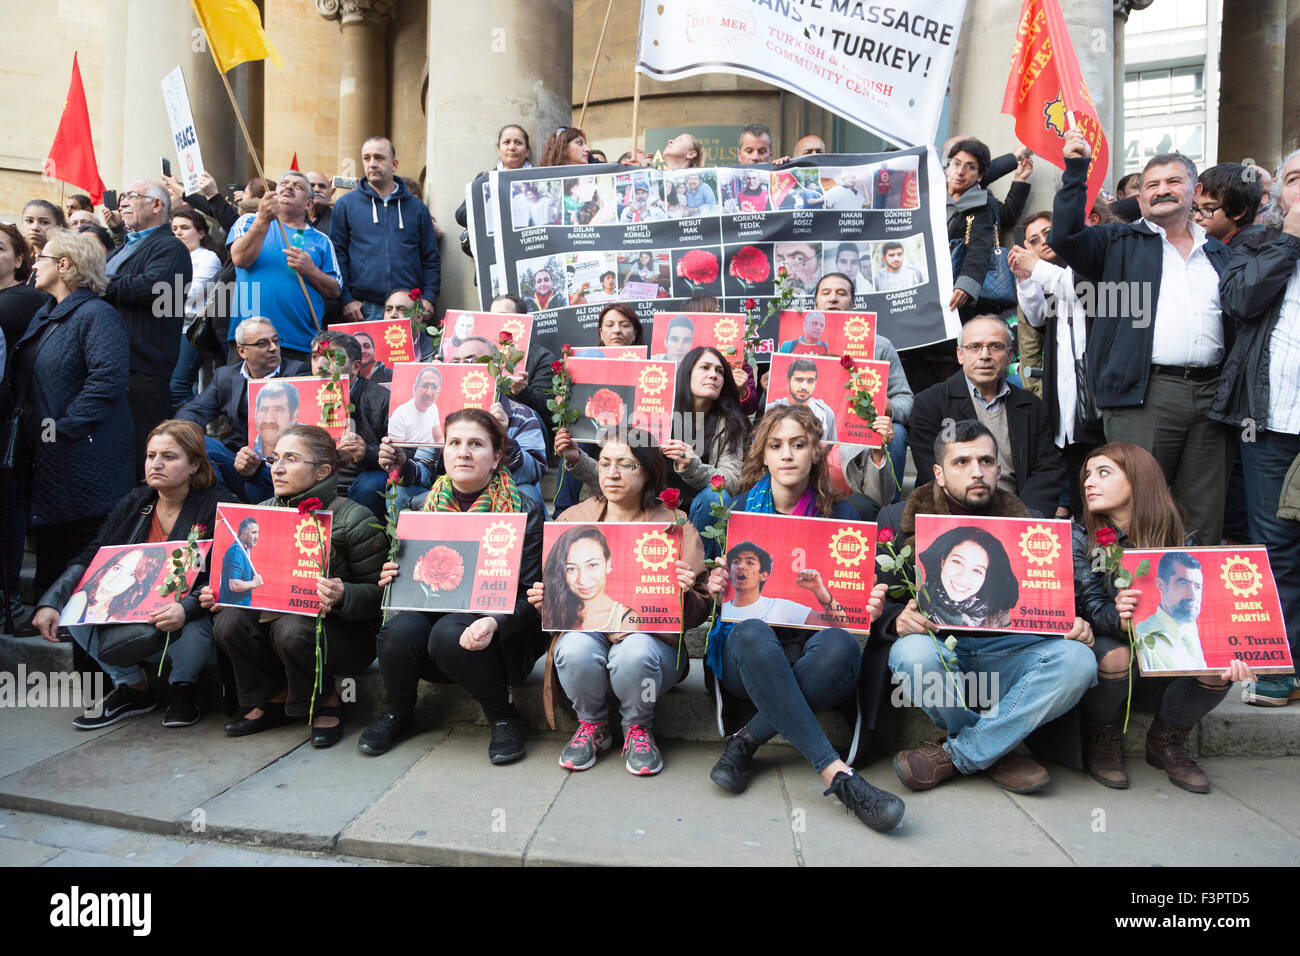 London, UK. 11/10/2015. Members of Emek Partisi (EMEP) hold up photos of people killed by the bombs in Ankara. Several thousand Kurds and Turks marched from Downing Street to the BBC headquarters at Langham Place, to protest against the bombs in Ankara that killed many people attending a peace demonstration. Credit:  Nick Savage/Alamy Live News Stock Photo